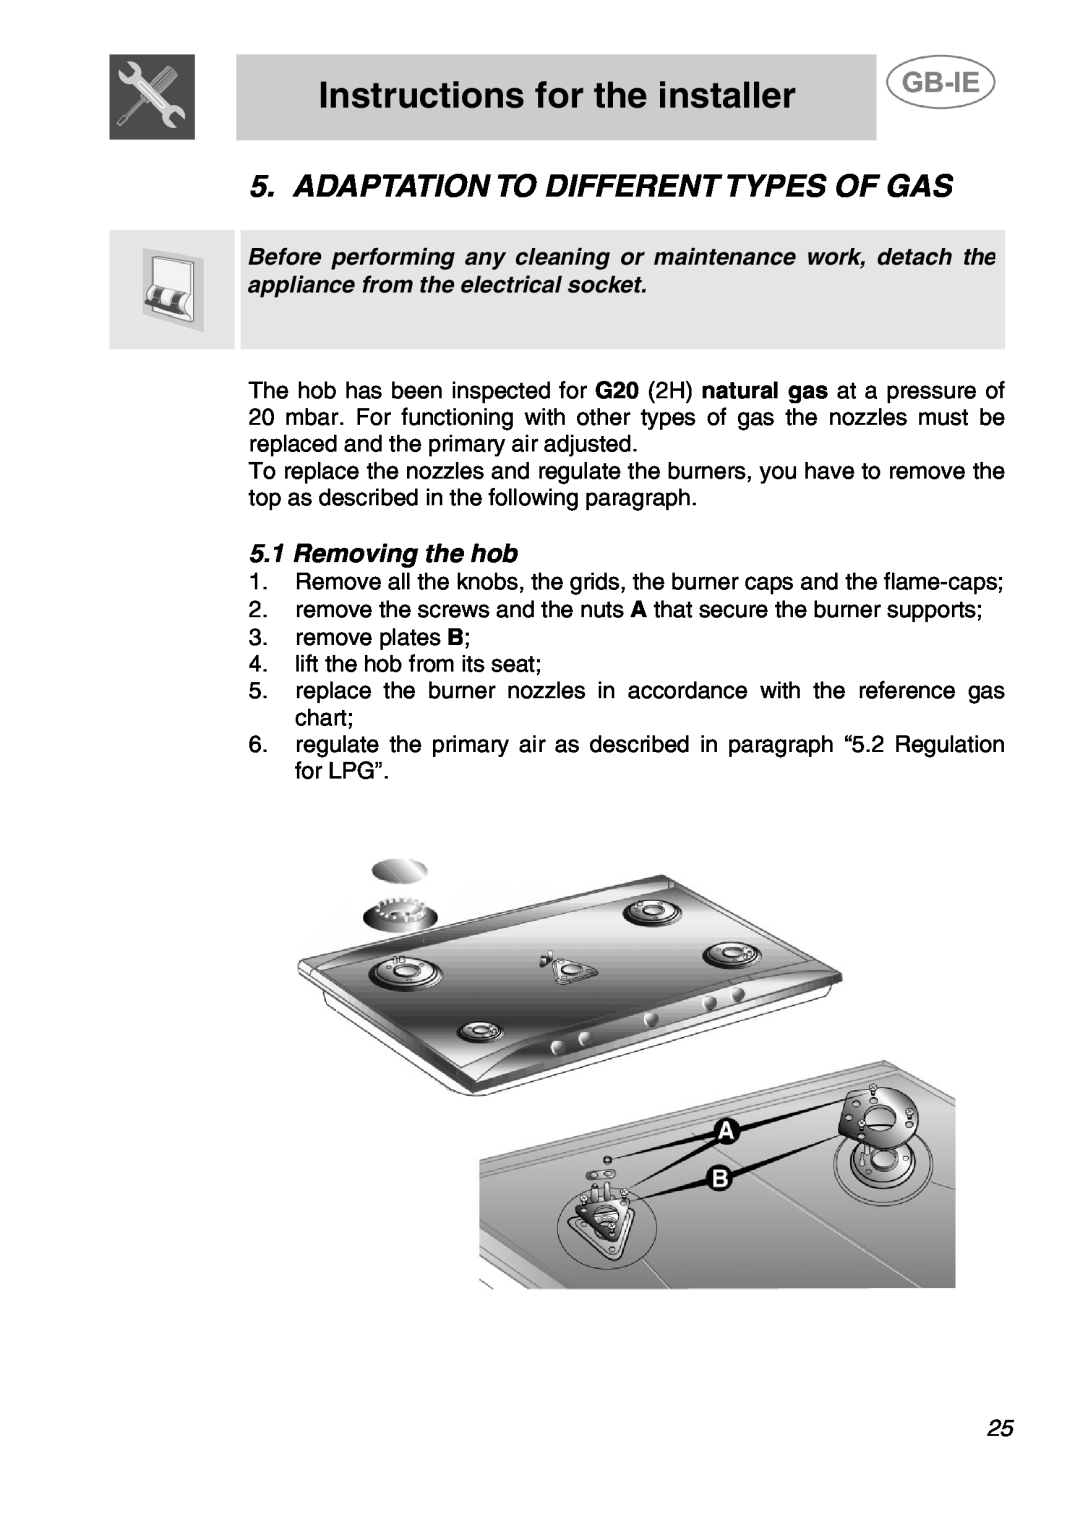 Smeg ER17350FG, ER17450FG manual Adaptation To Different Types Of Gas, Removing the hob, Instructions for the installer 